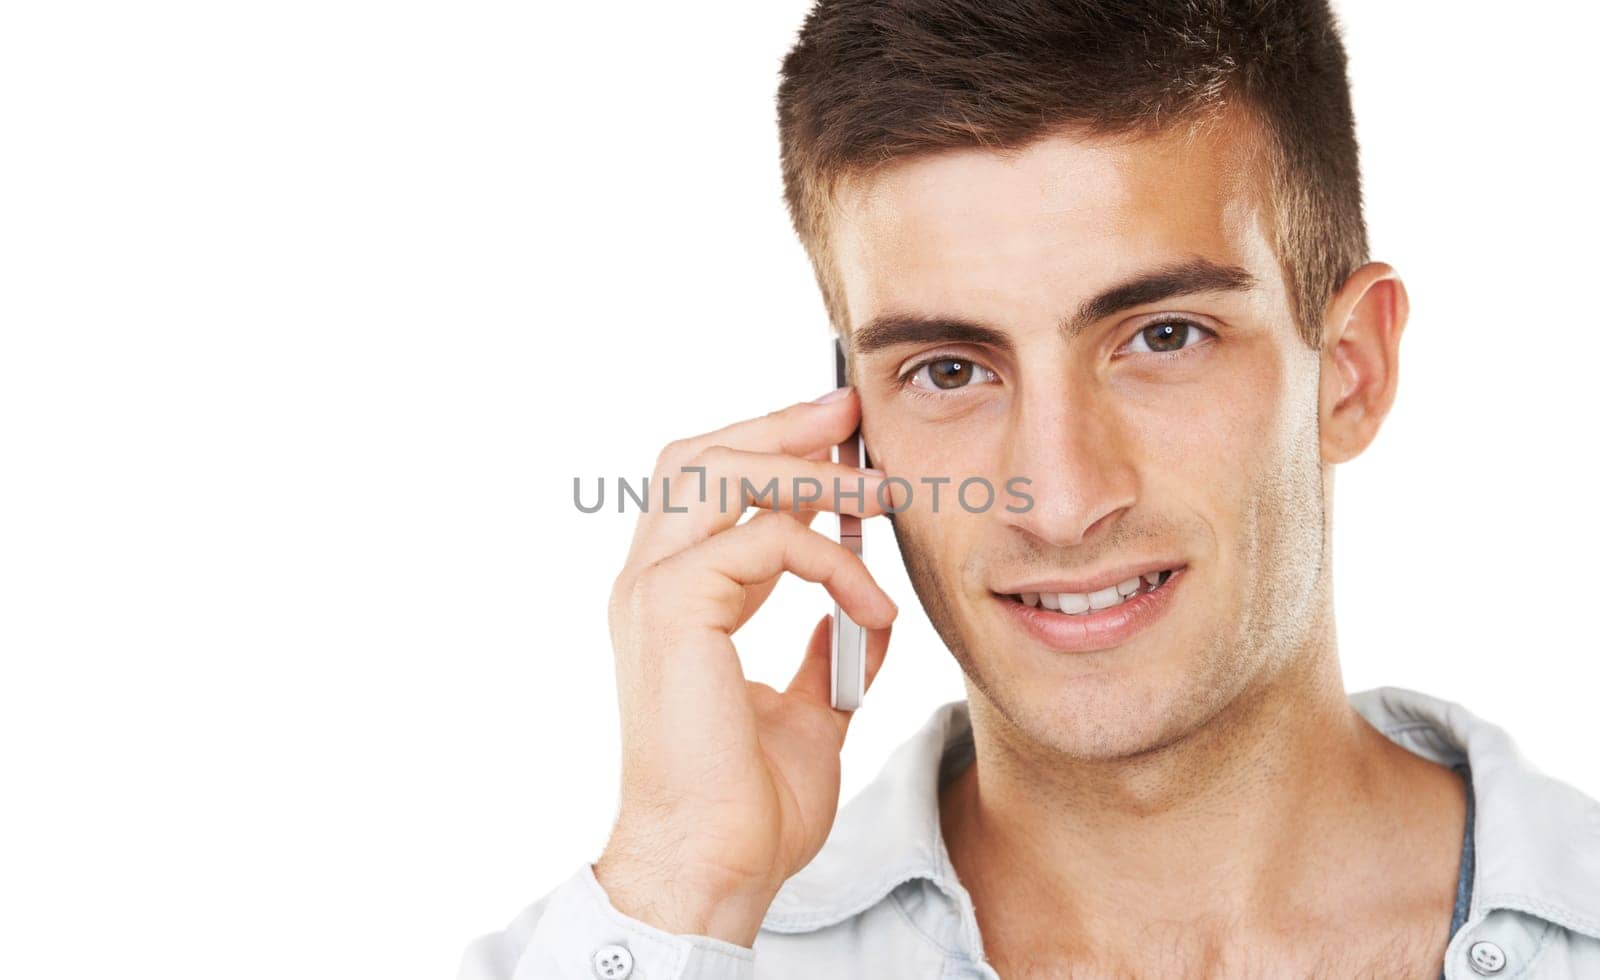 Communication through technology. A handsome male talking on his cell phone with a white background